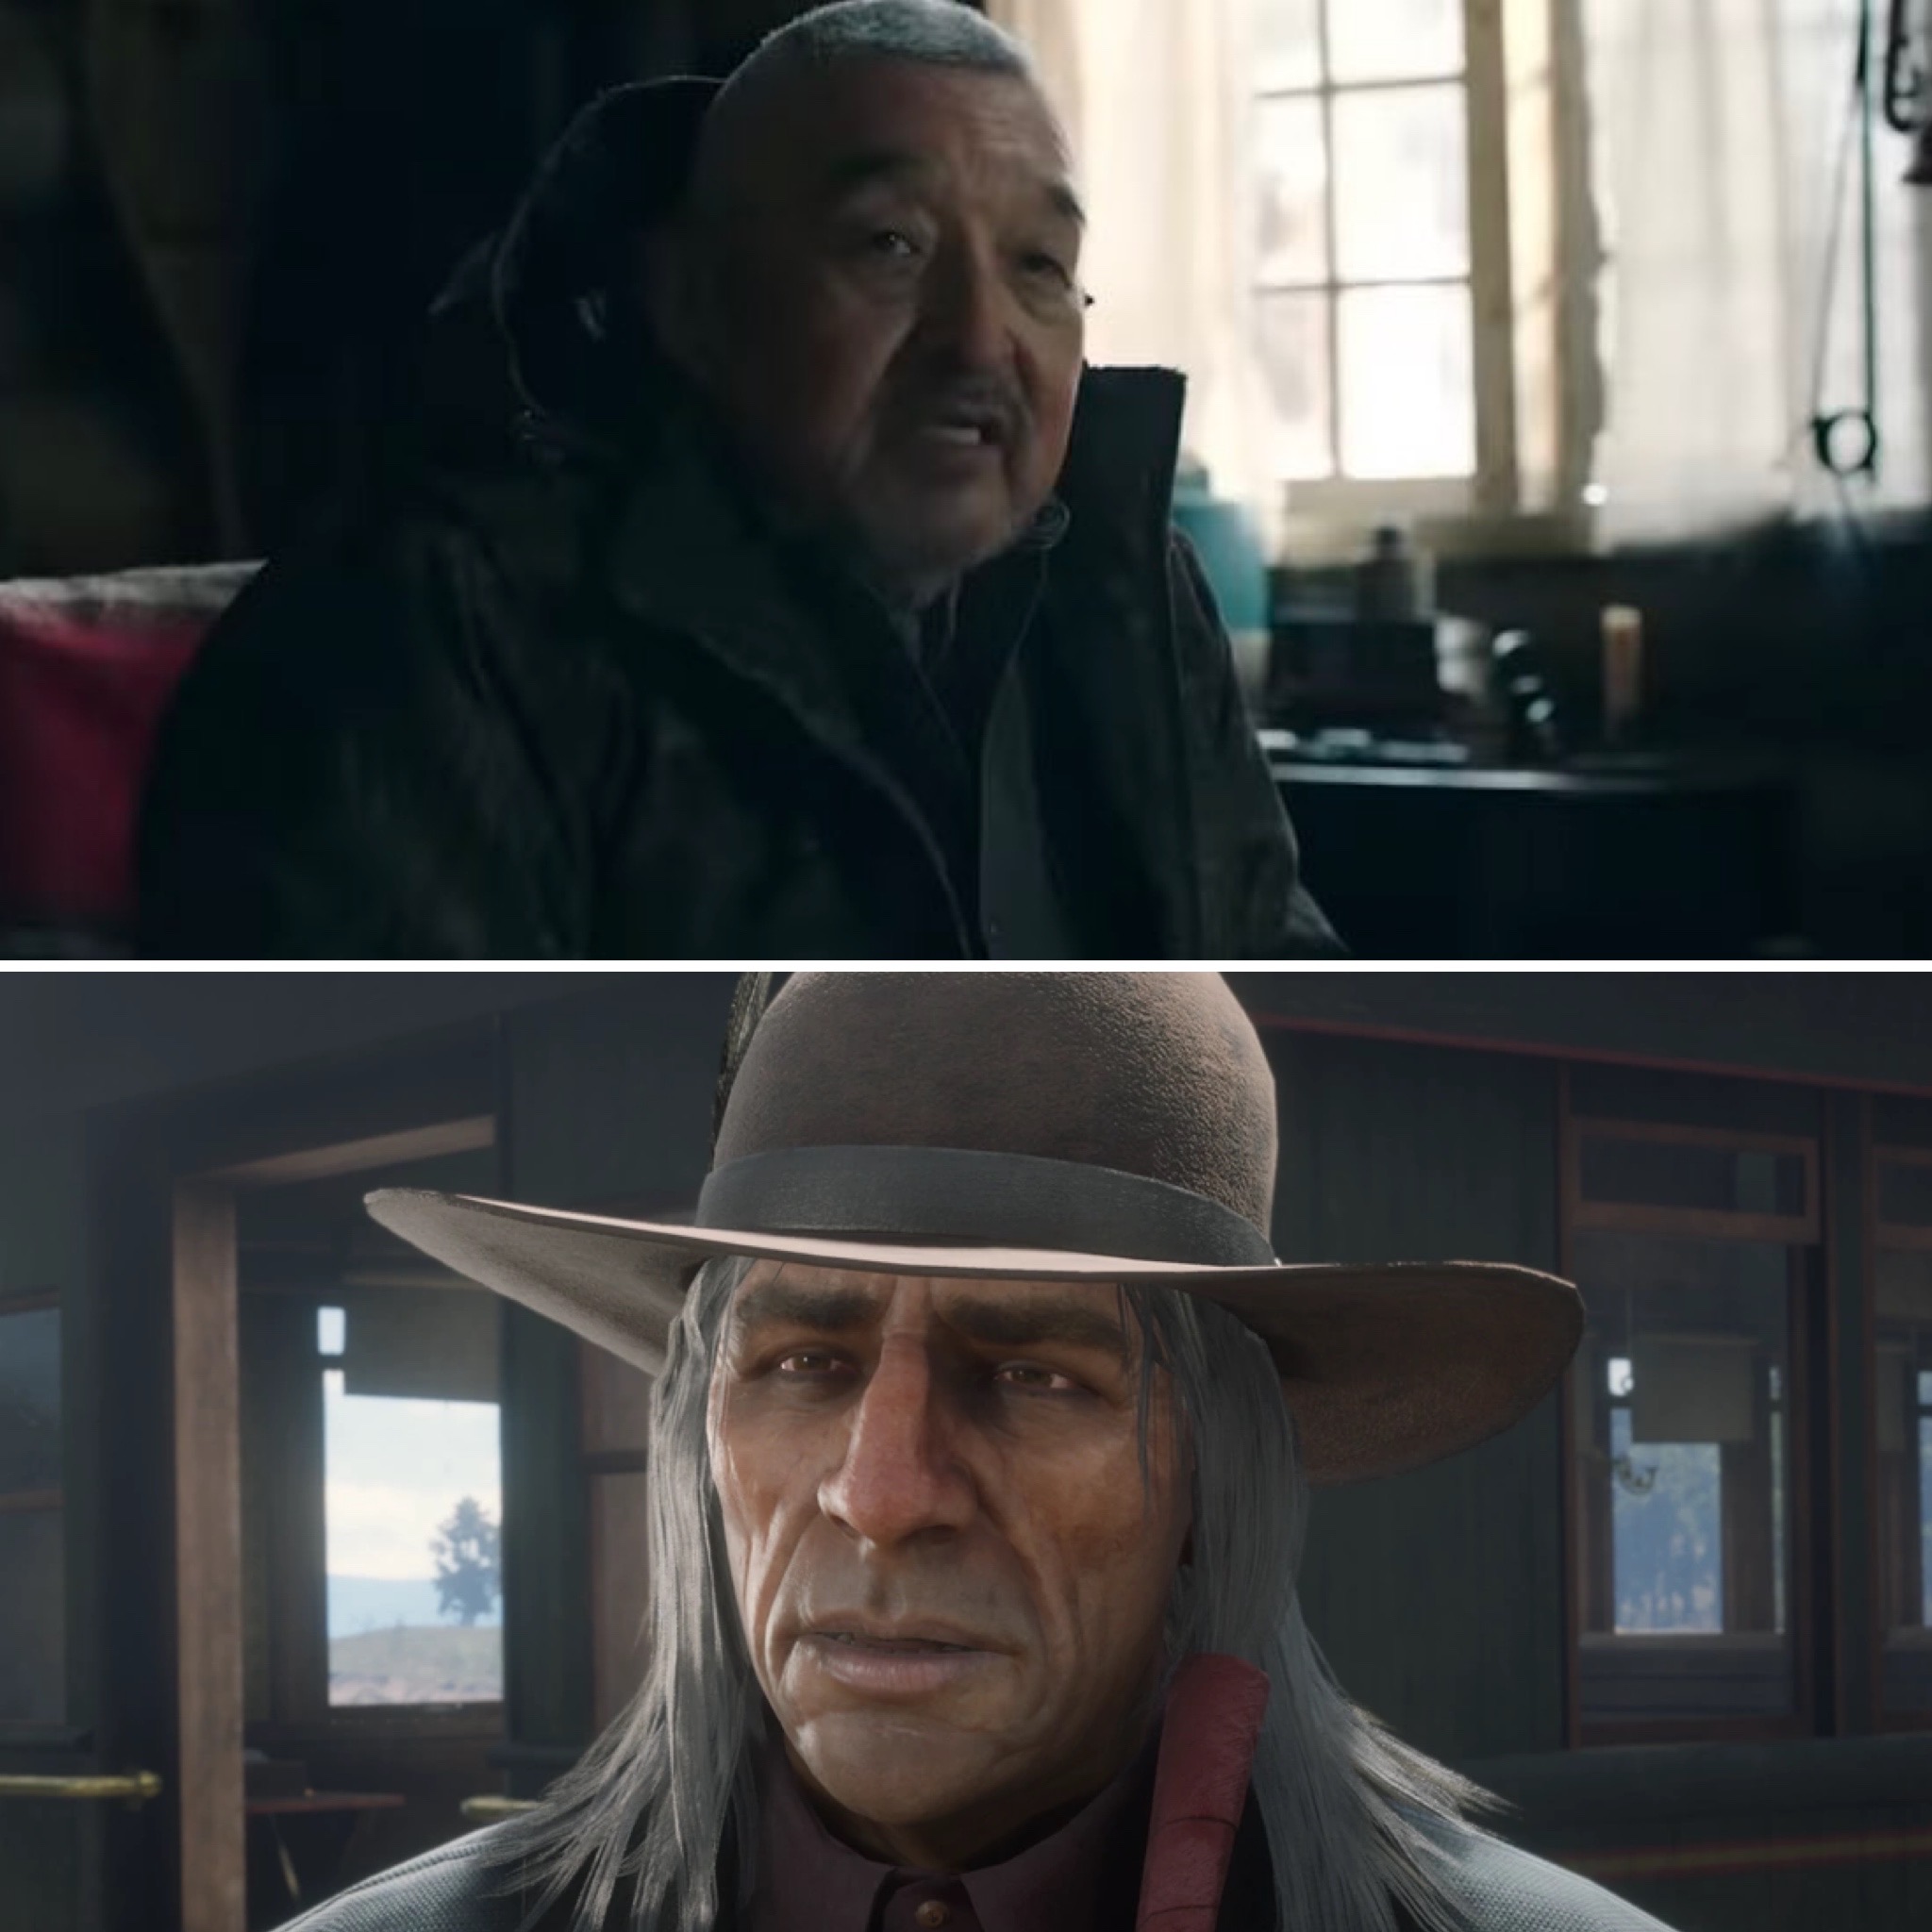 DomTheBomb on Twitter: "In episode of #TheLastOfUsHBO we should meet Marlon played by Graham Greene Fun fact: He was the actor for Rains Fall in Red Dead Redemption https://t.co/NQFInxRRan" /